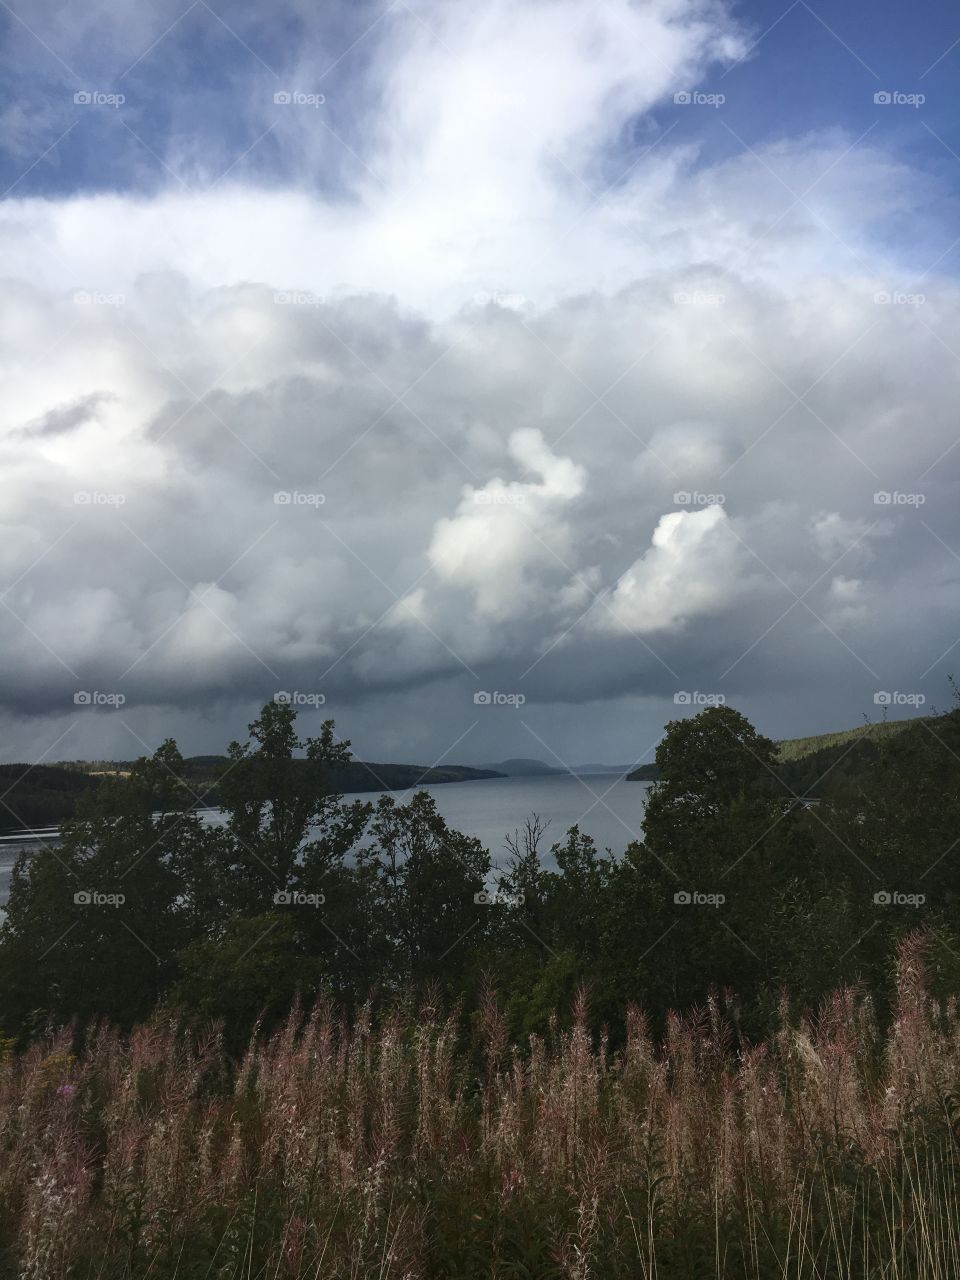 Swedish lake. Mighty clouds. Beautiful view. You know what you see